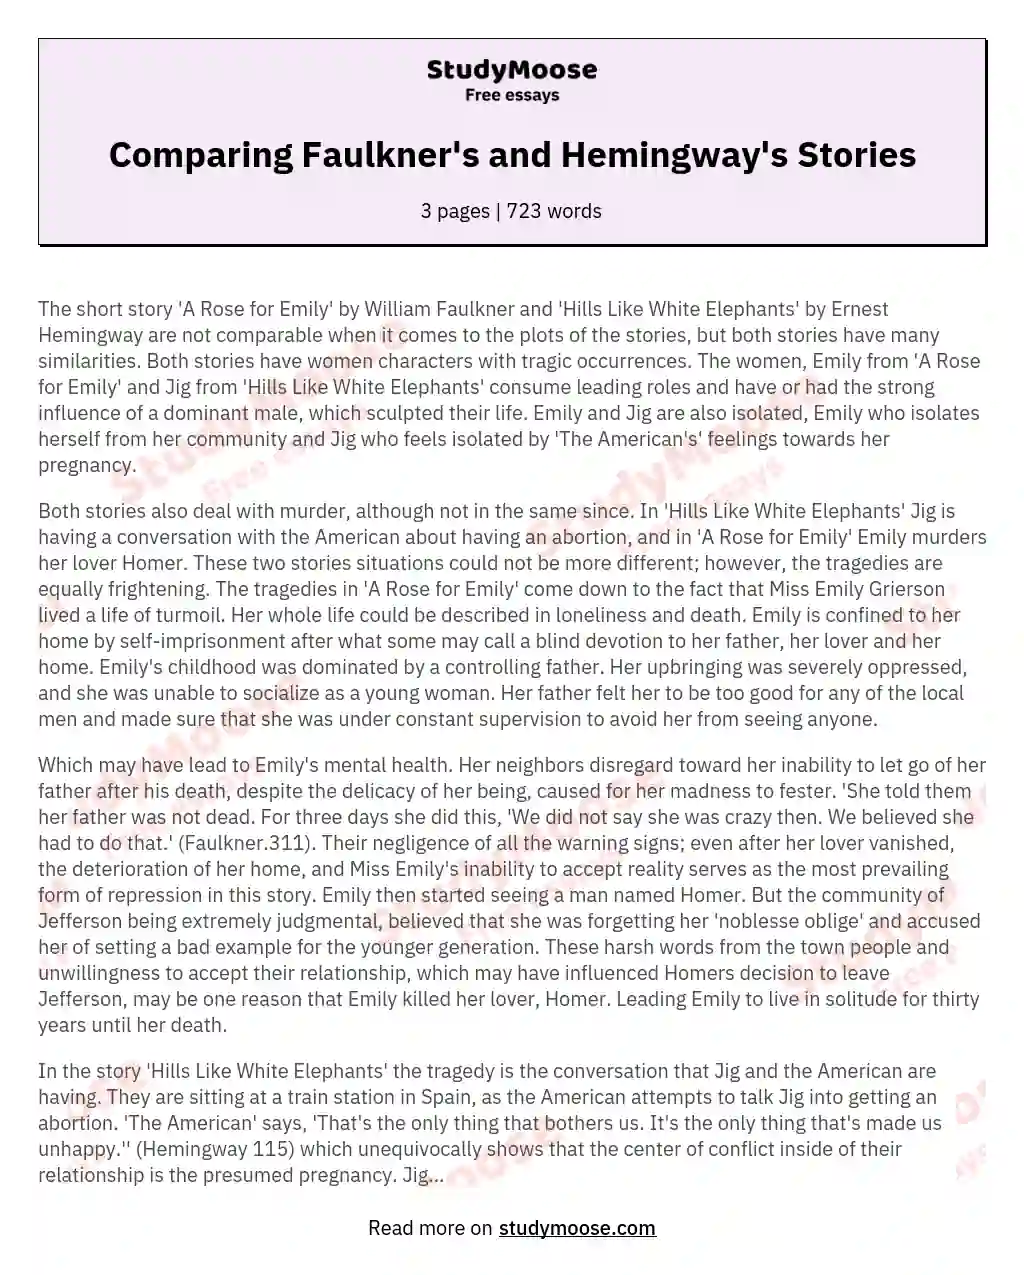 Comparing Faulkner's and Hemingway's Stories essay